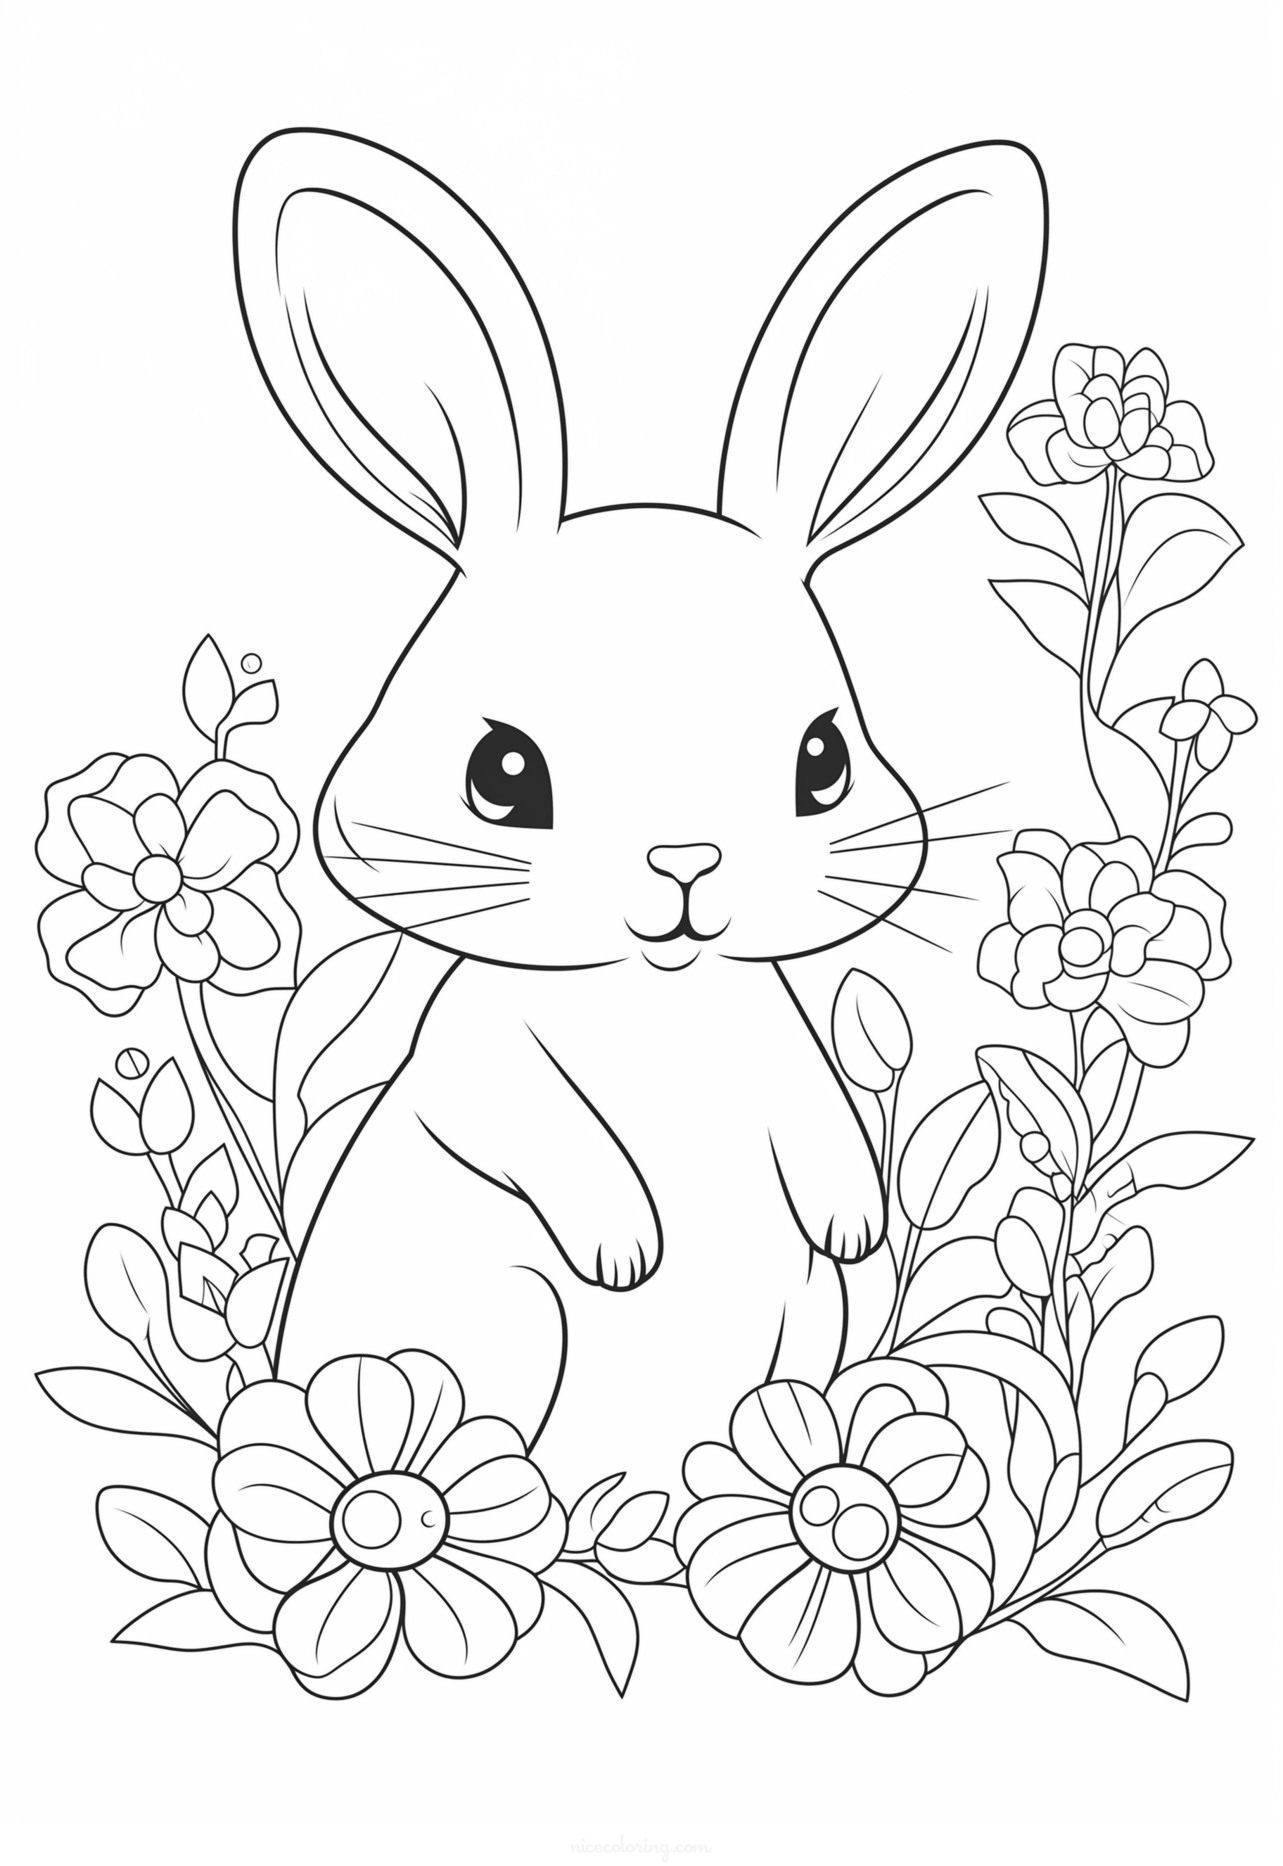 Coloring of a rabbit among flowers